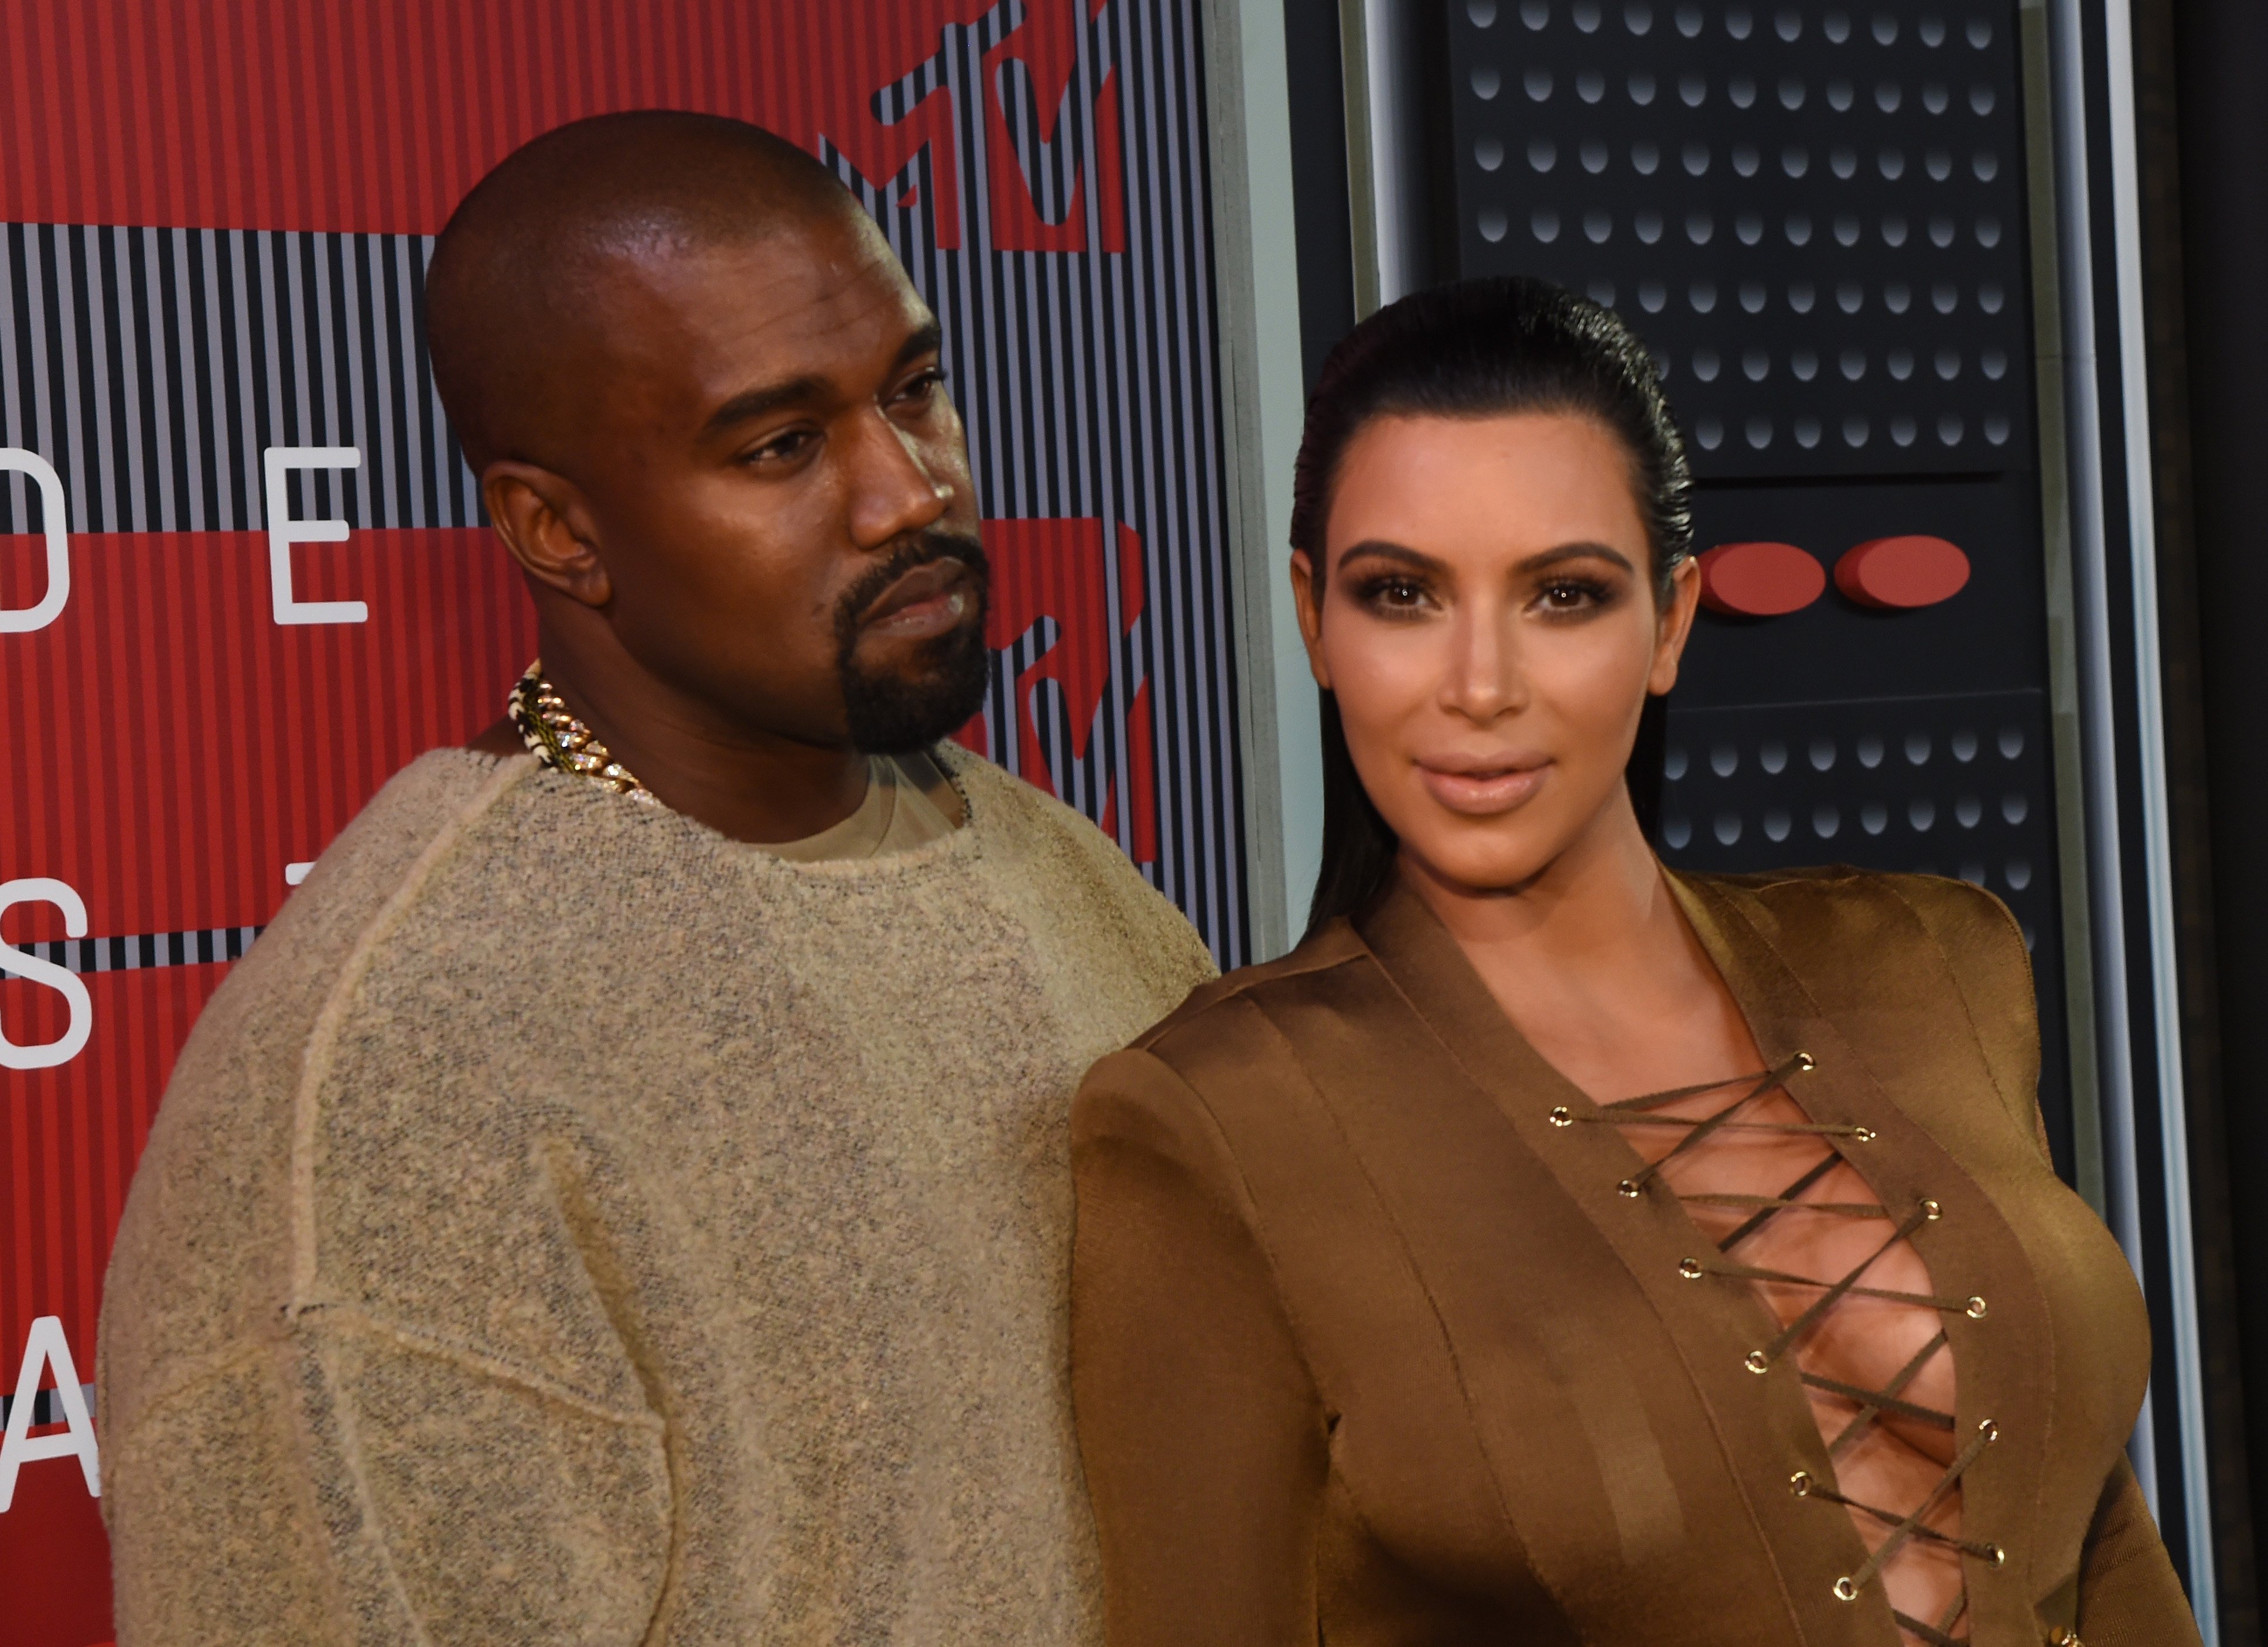 Kanye West & Kim Kardashian at the MTV Video Music Awards on Aug. 30, 2015 in California | Photo: Getty Images